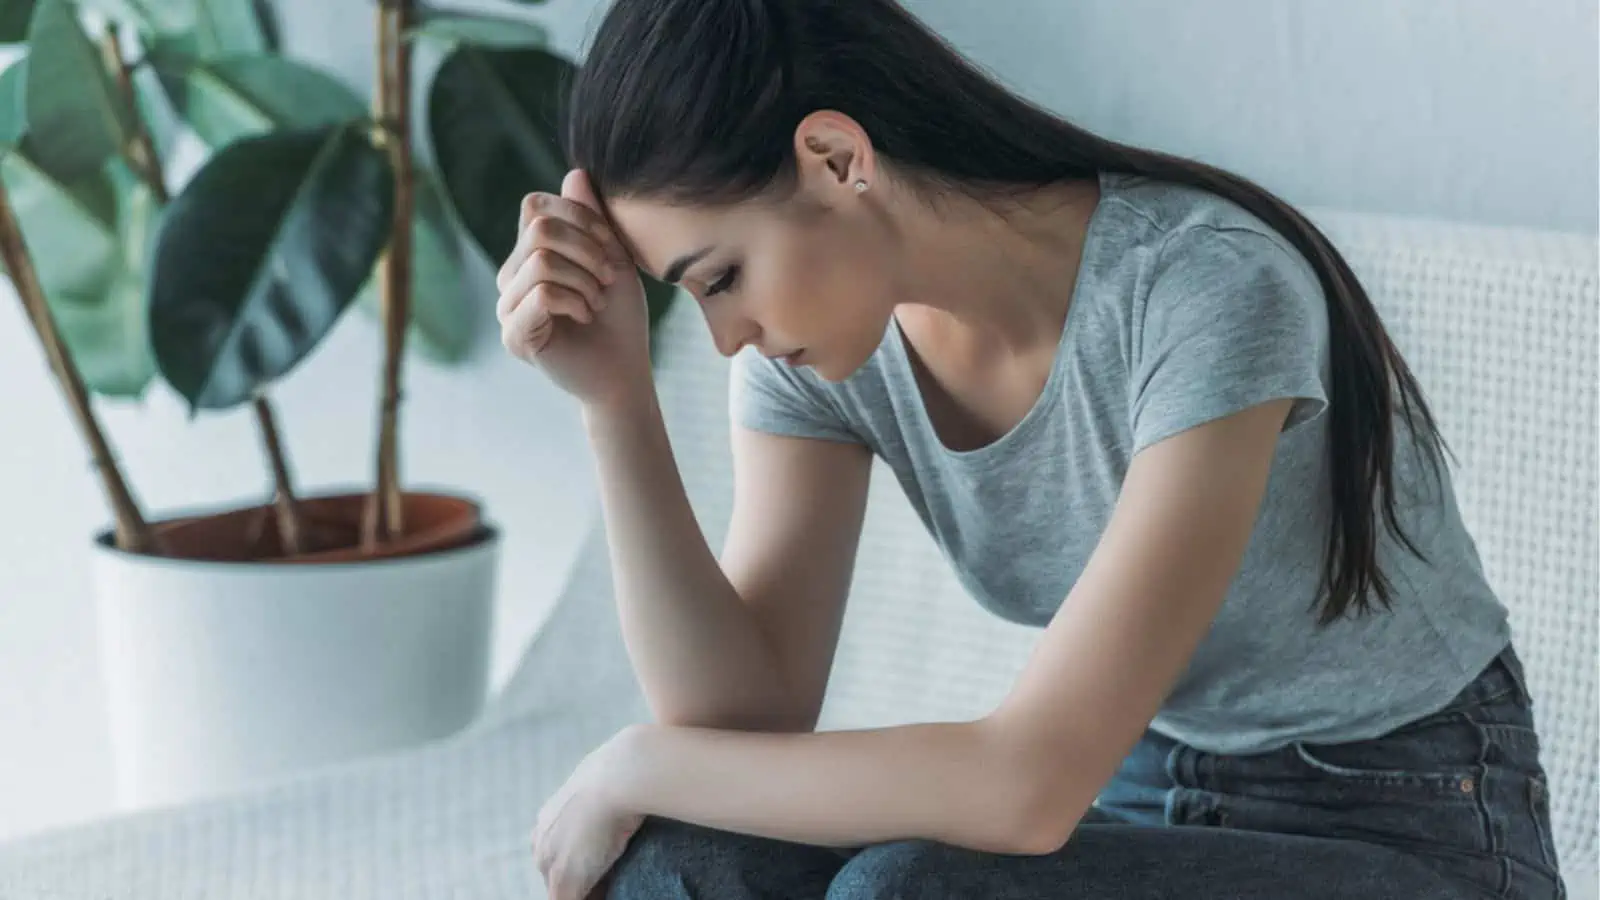 Frustrated sad young woman in depression sitting on couch